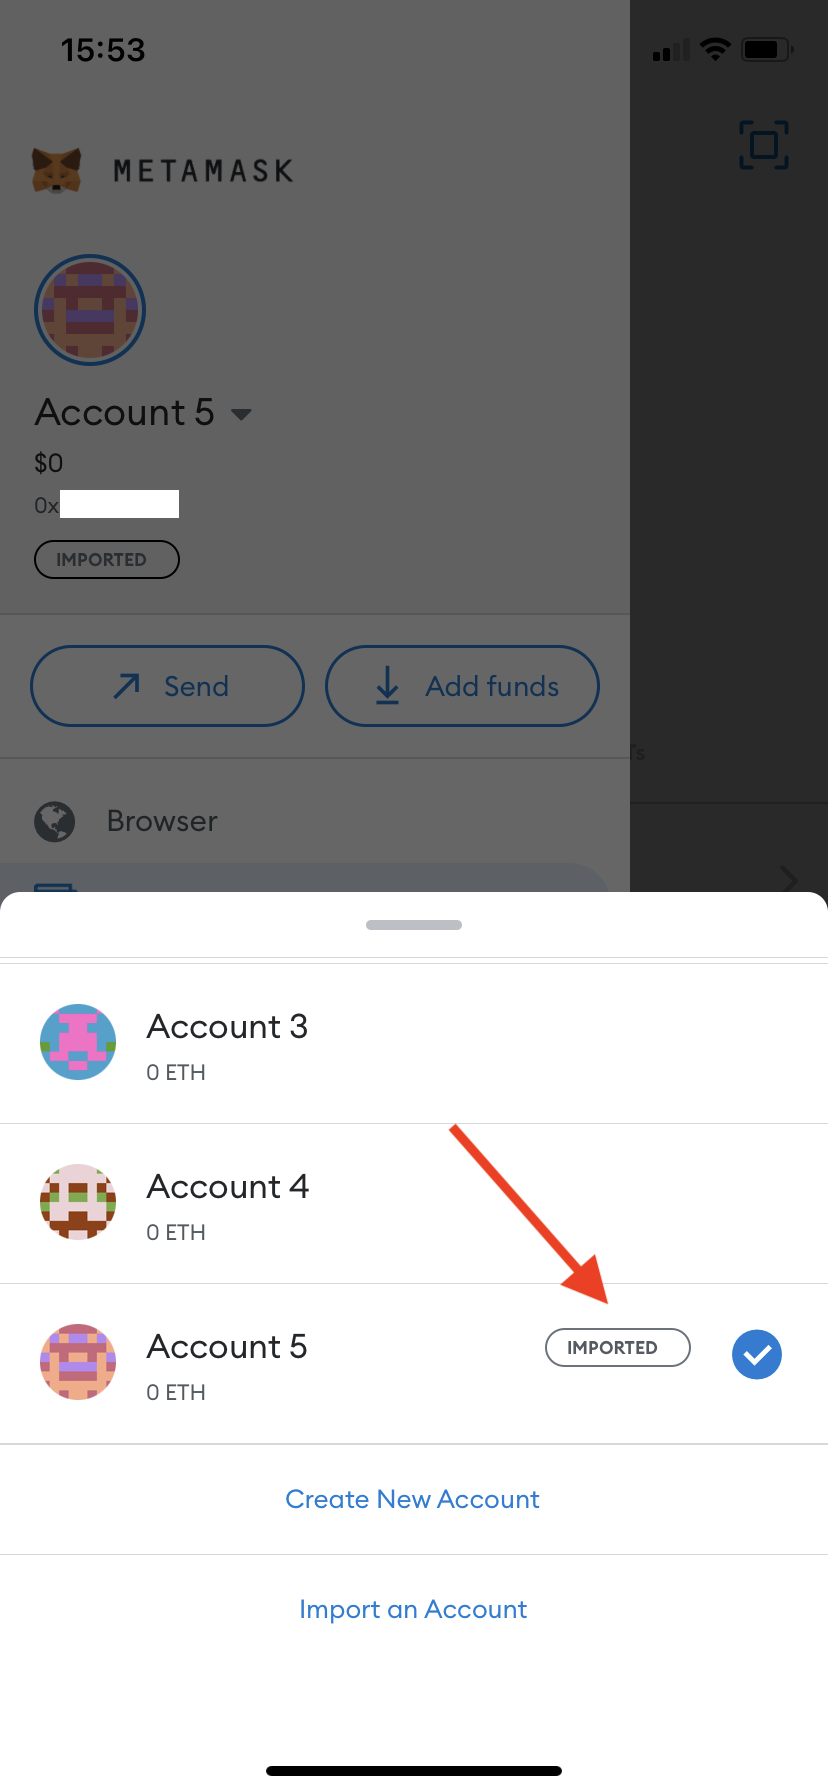 how to delete an account on metamask